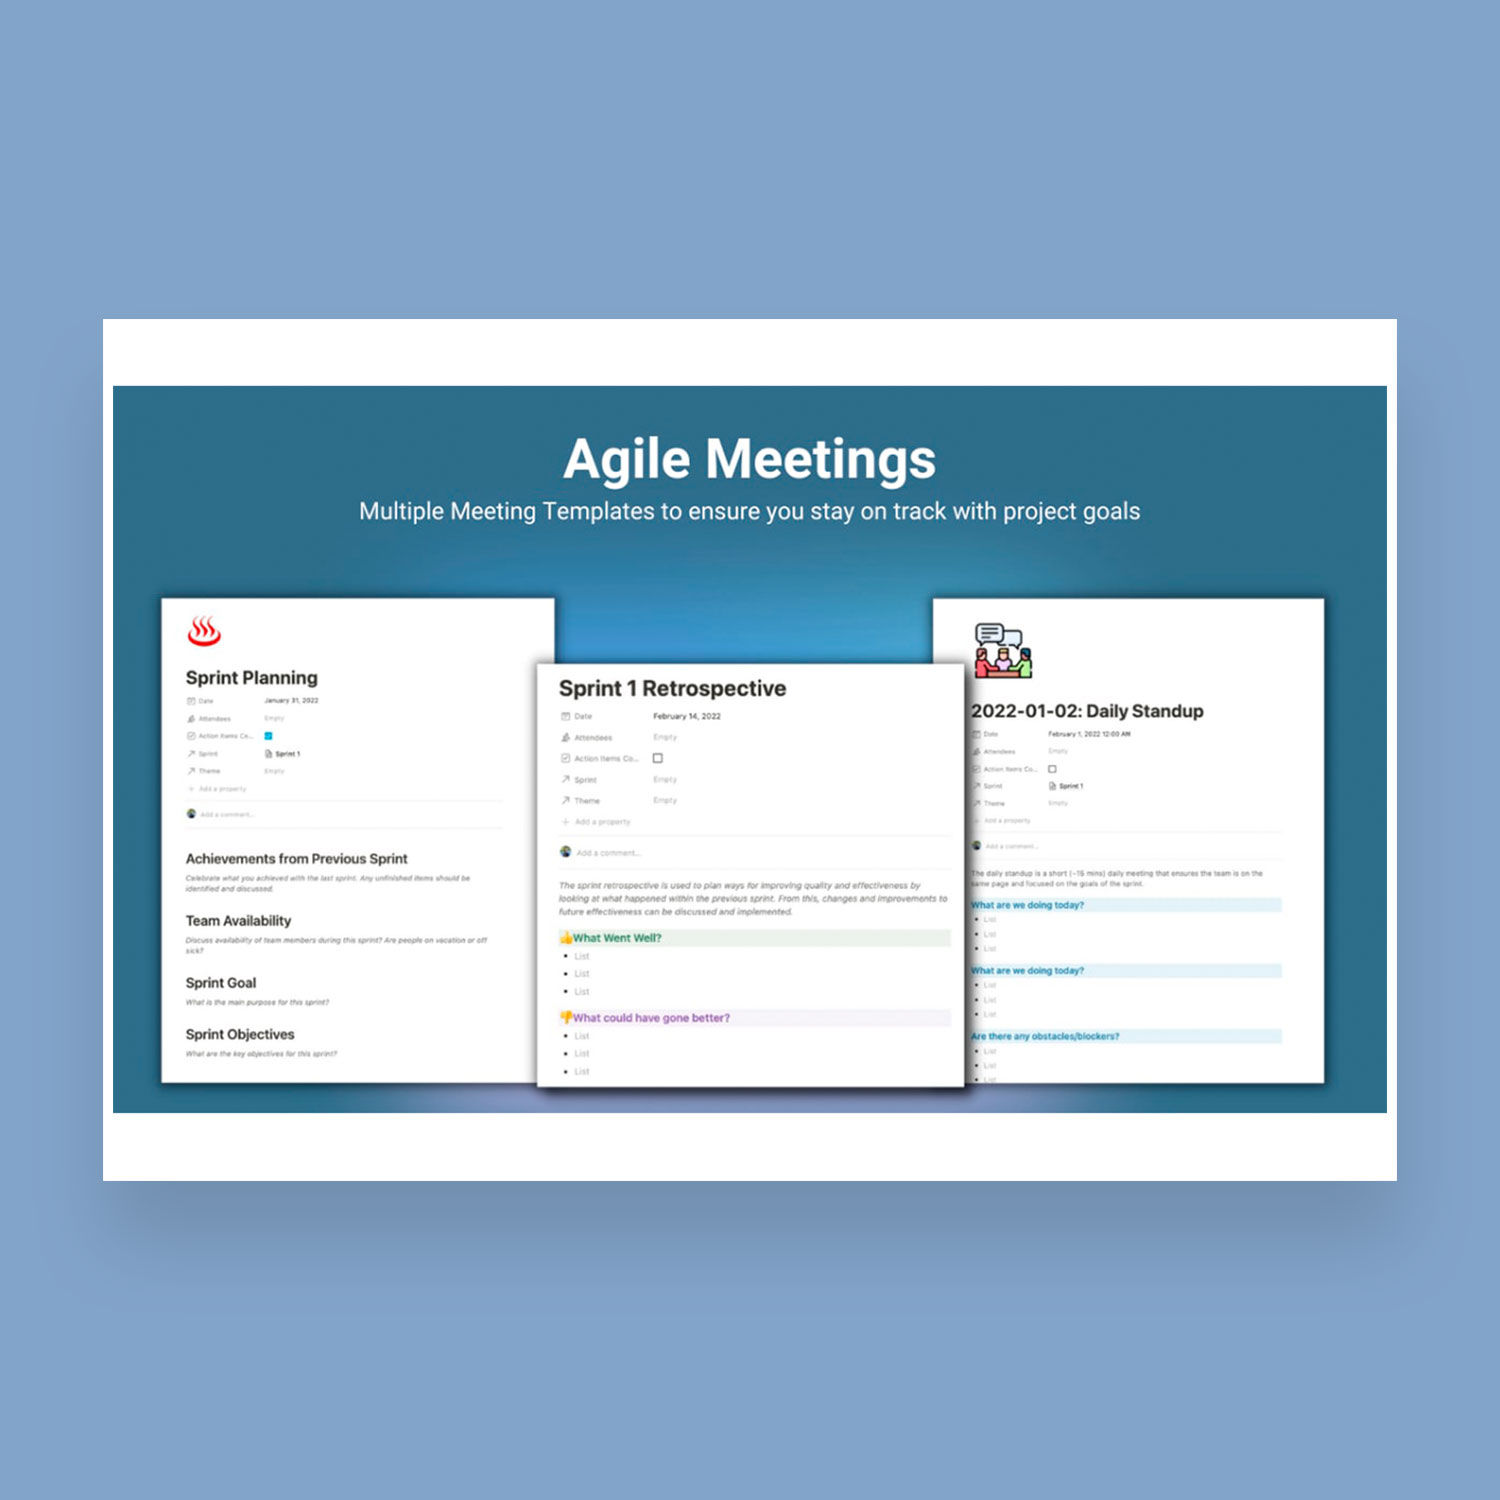 Agile Meetings, Multiple Meeting Templates to ensure you stay on track with project goals.